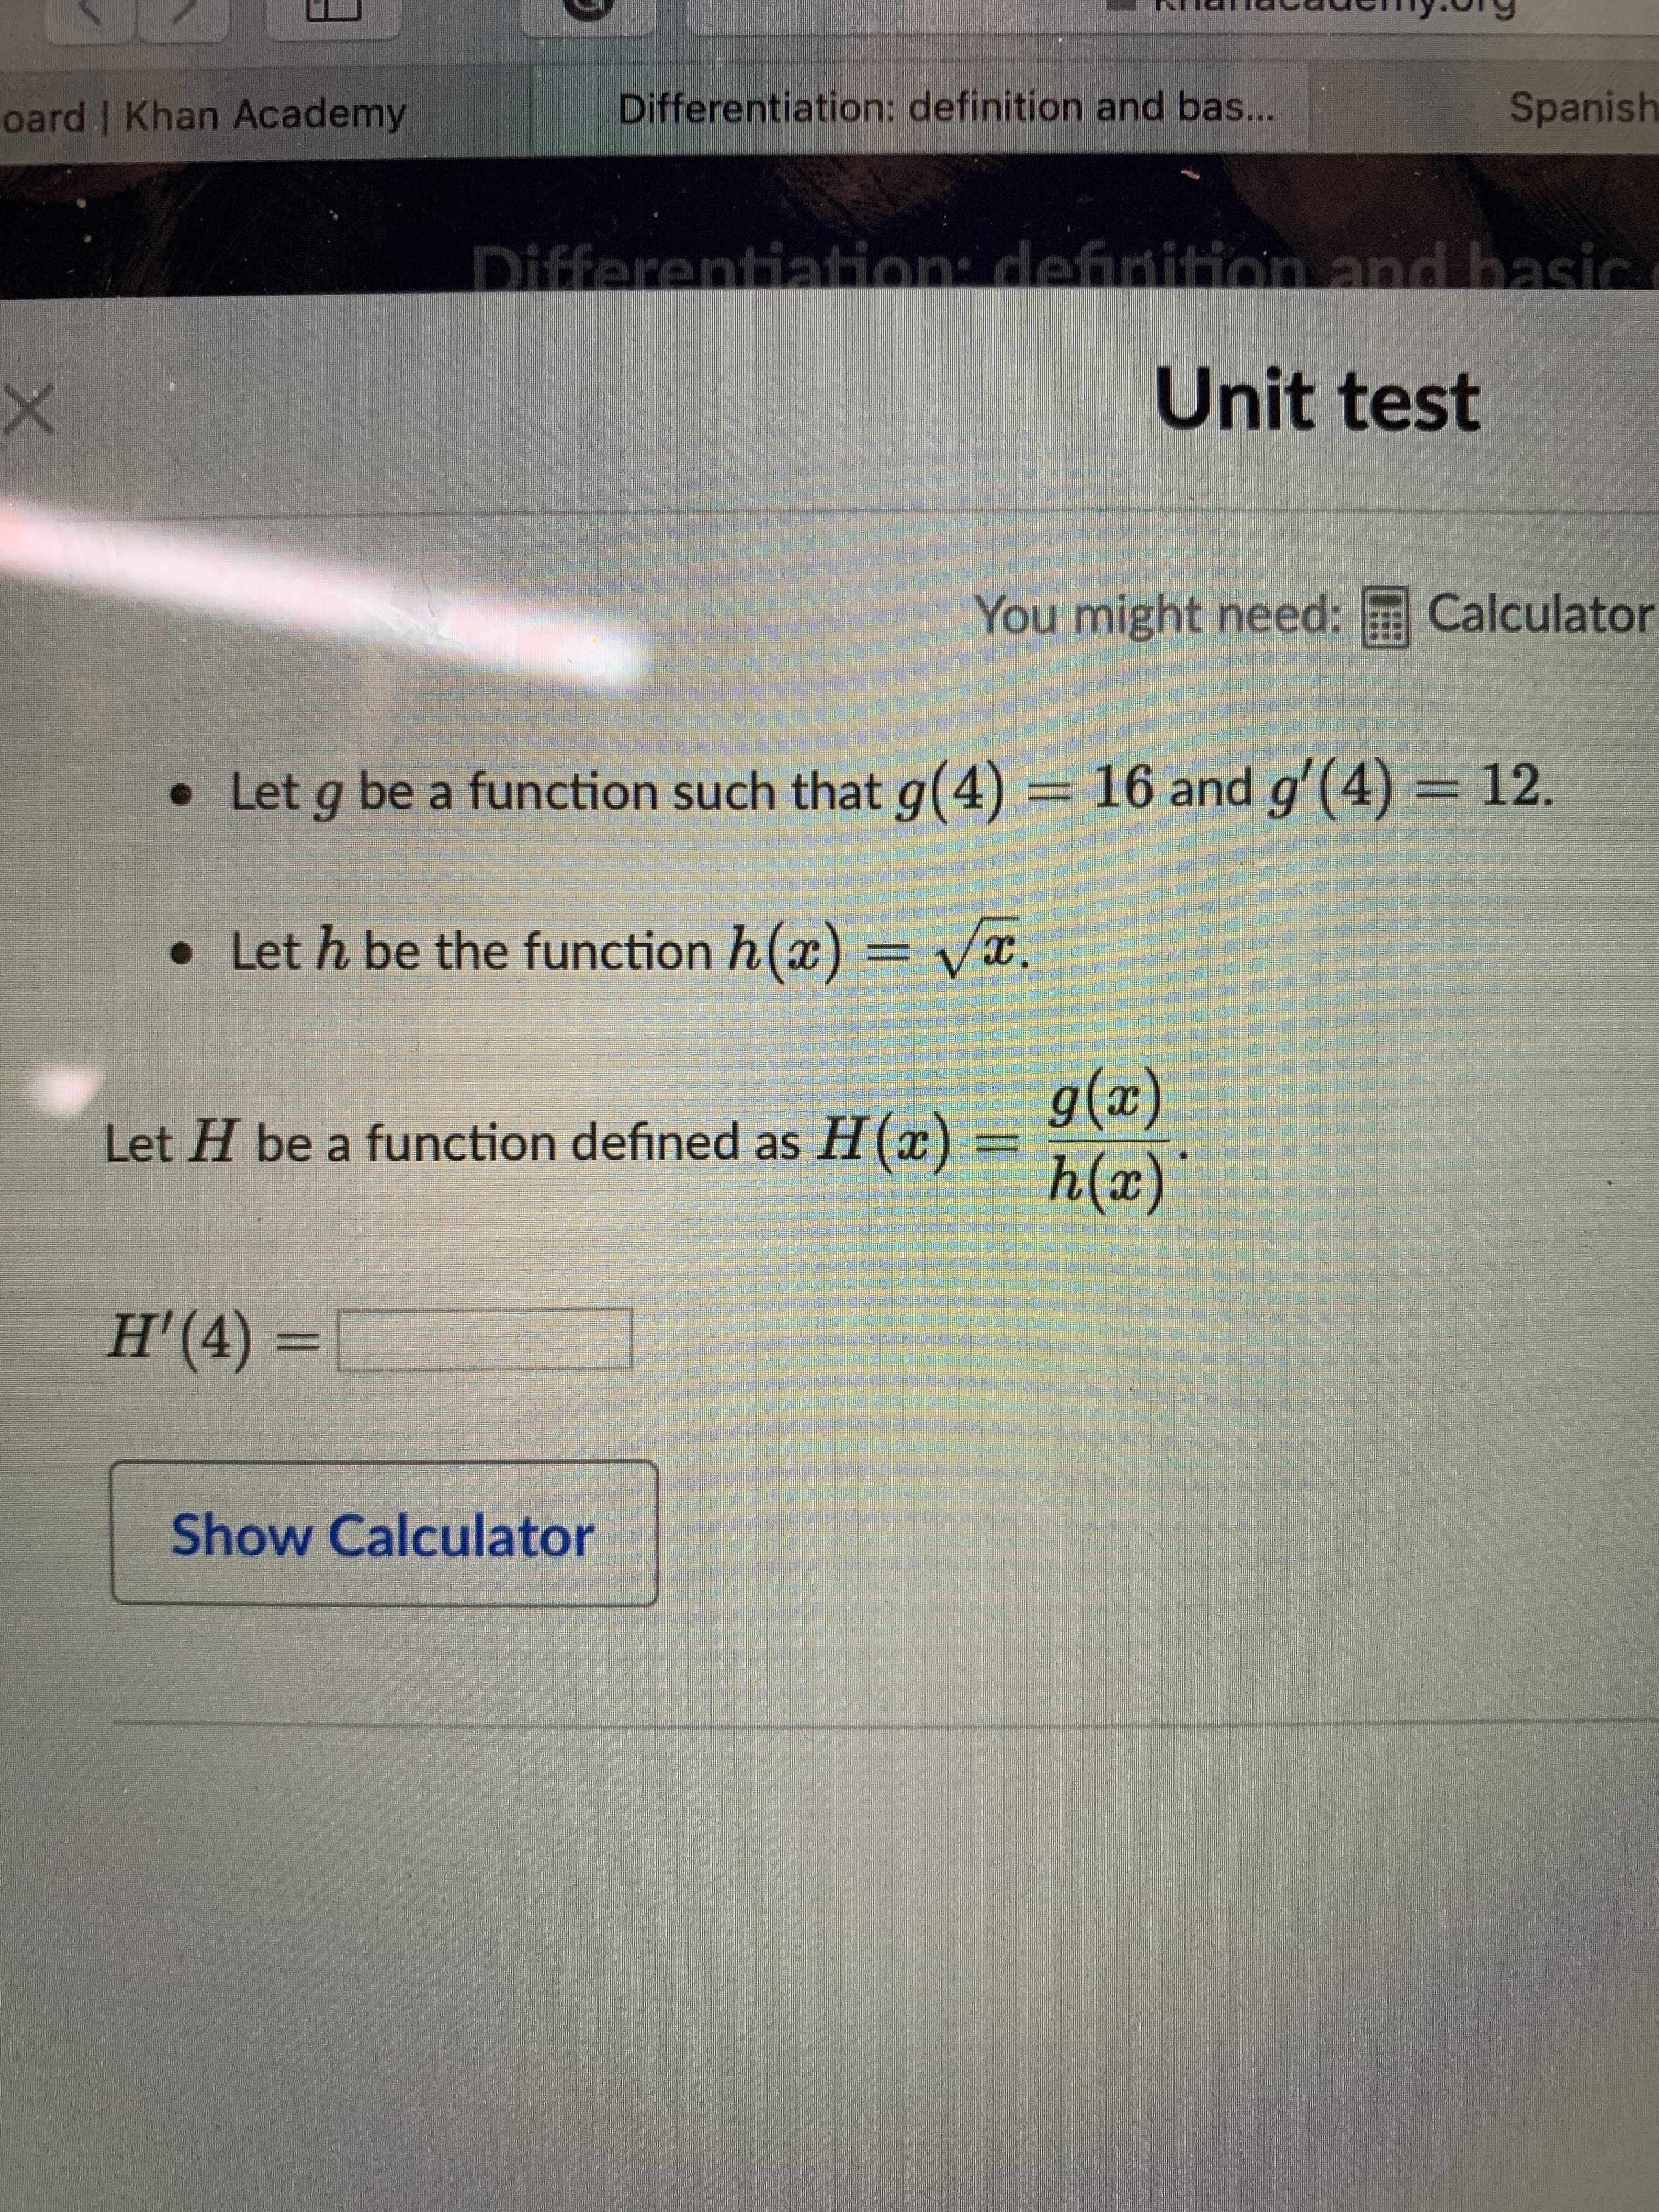 Differentiation: definition and bas...
Spanish
oard | Khan Academy
Differentiation: definition and basic.
Unit test
You might need: E Calculator
• Let g be a function such that g(4) = 16 and g'(4) = 12.
• Let h be the function h(x) = vx.
g(x)
h(x)
Let H be a function defined as H(x)
H'(4) =
Show Calculator
